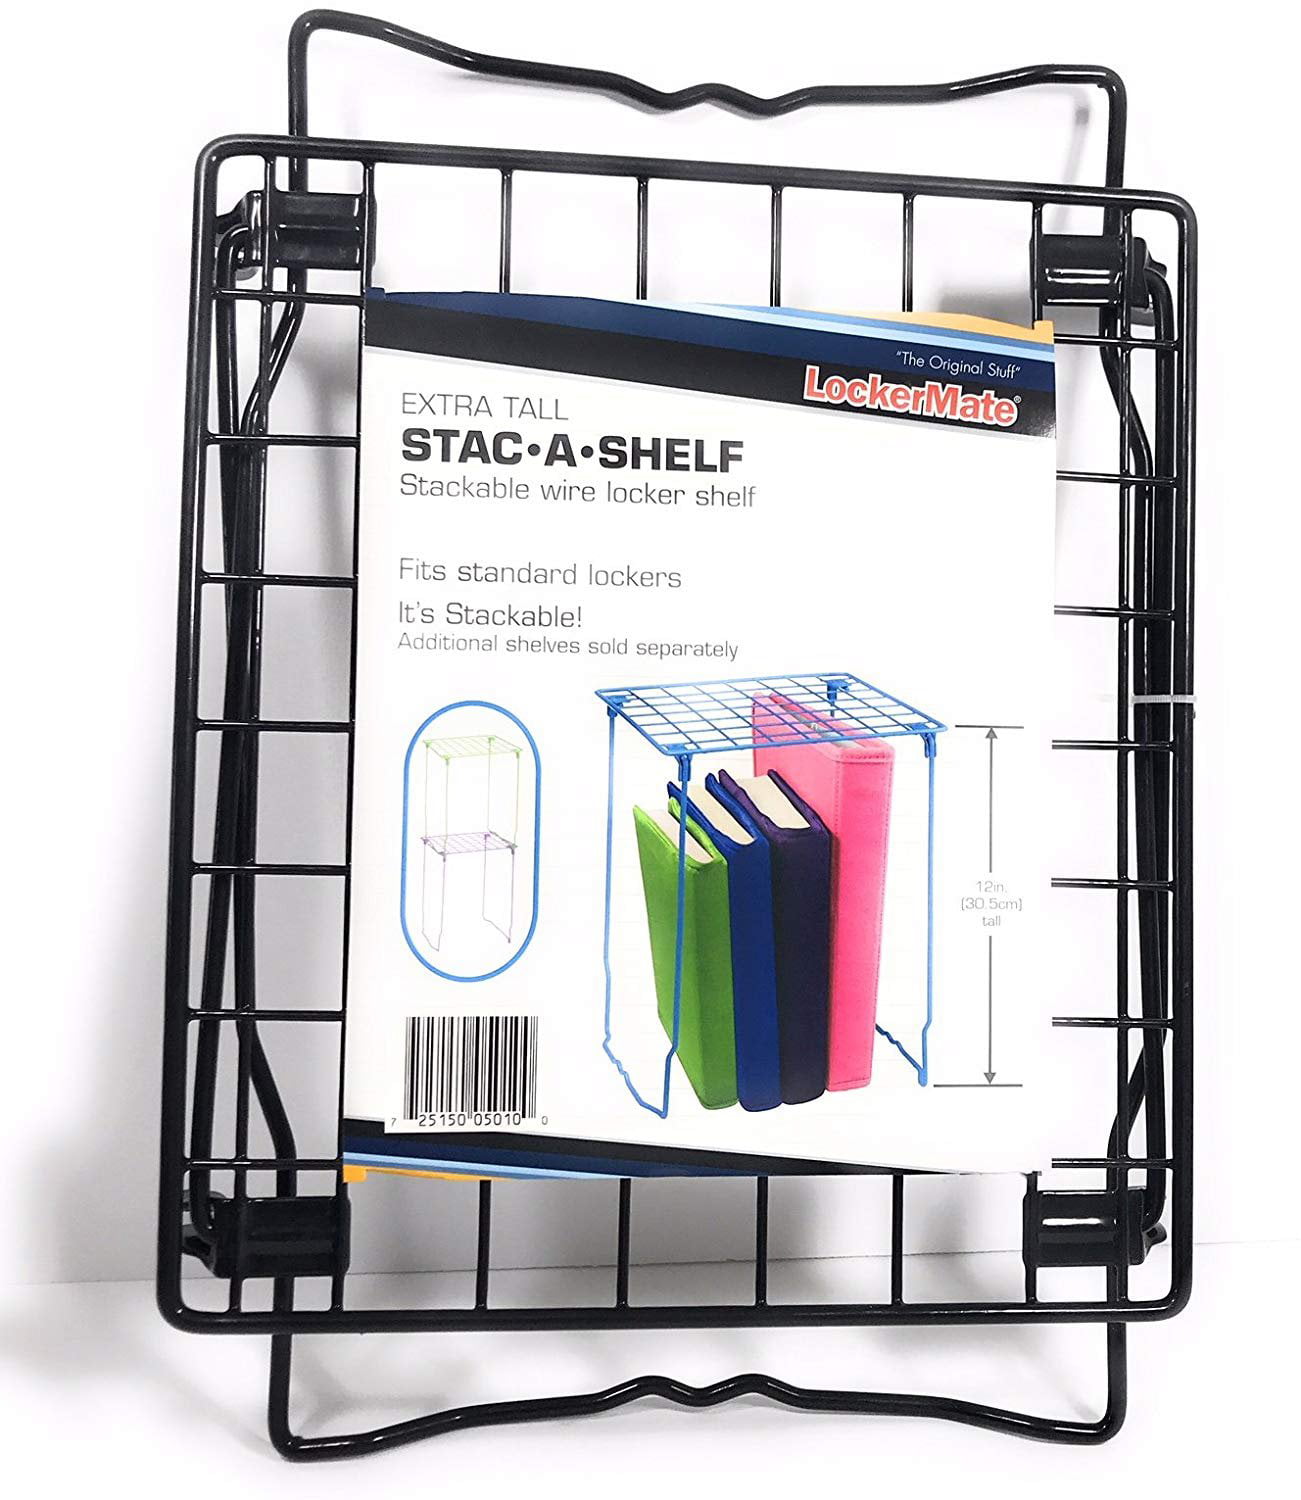 NEW Blue Extra Tall Wire Locker Shelf Stac-a-Shelf Stackable 12 Inches Tall 